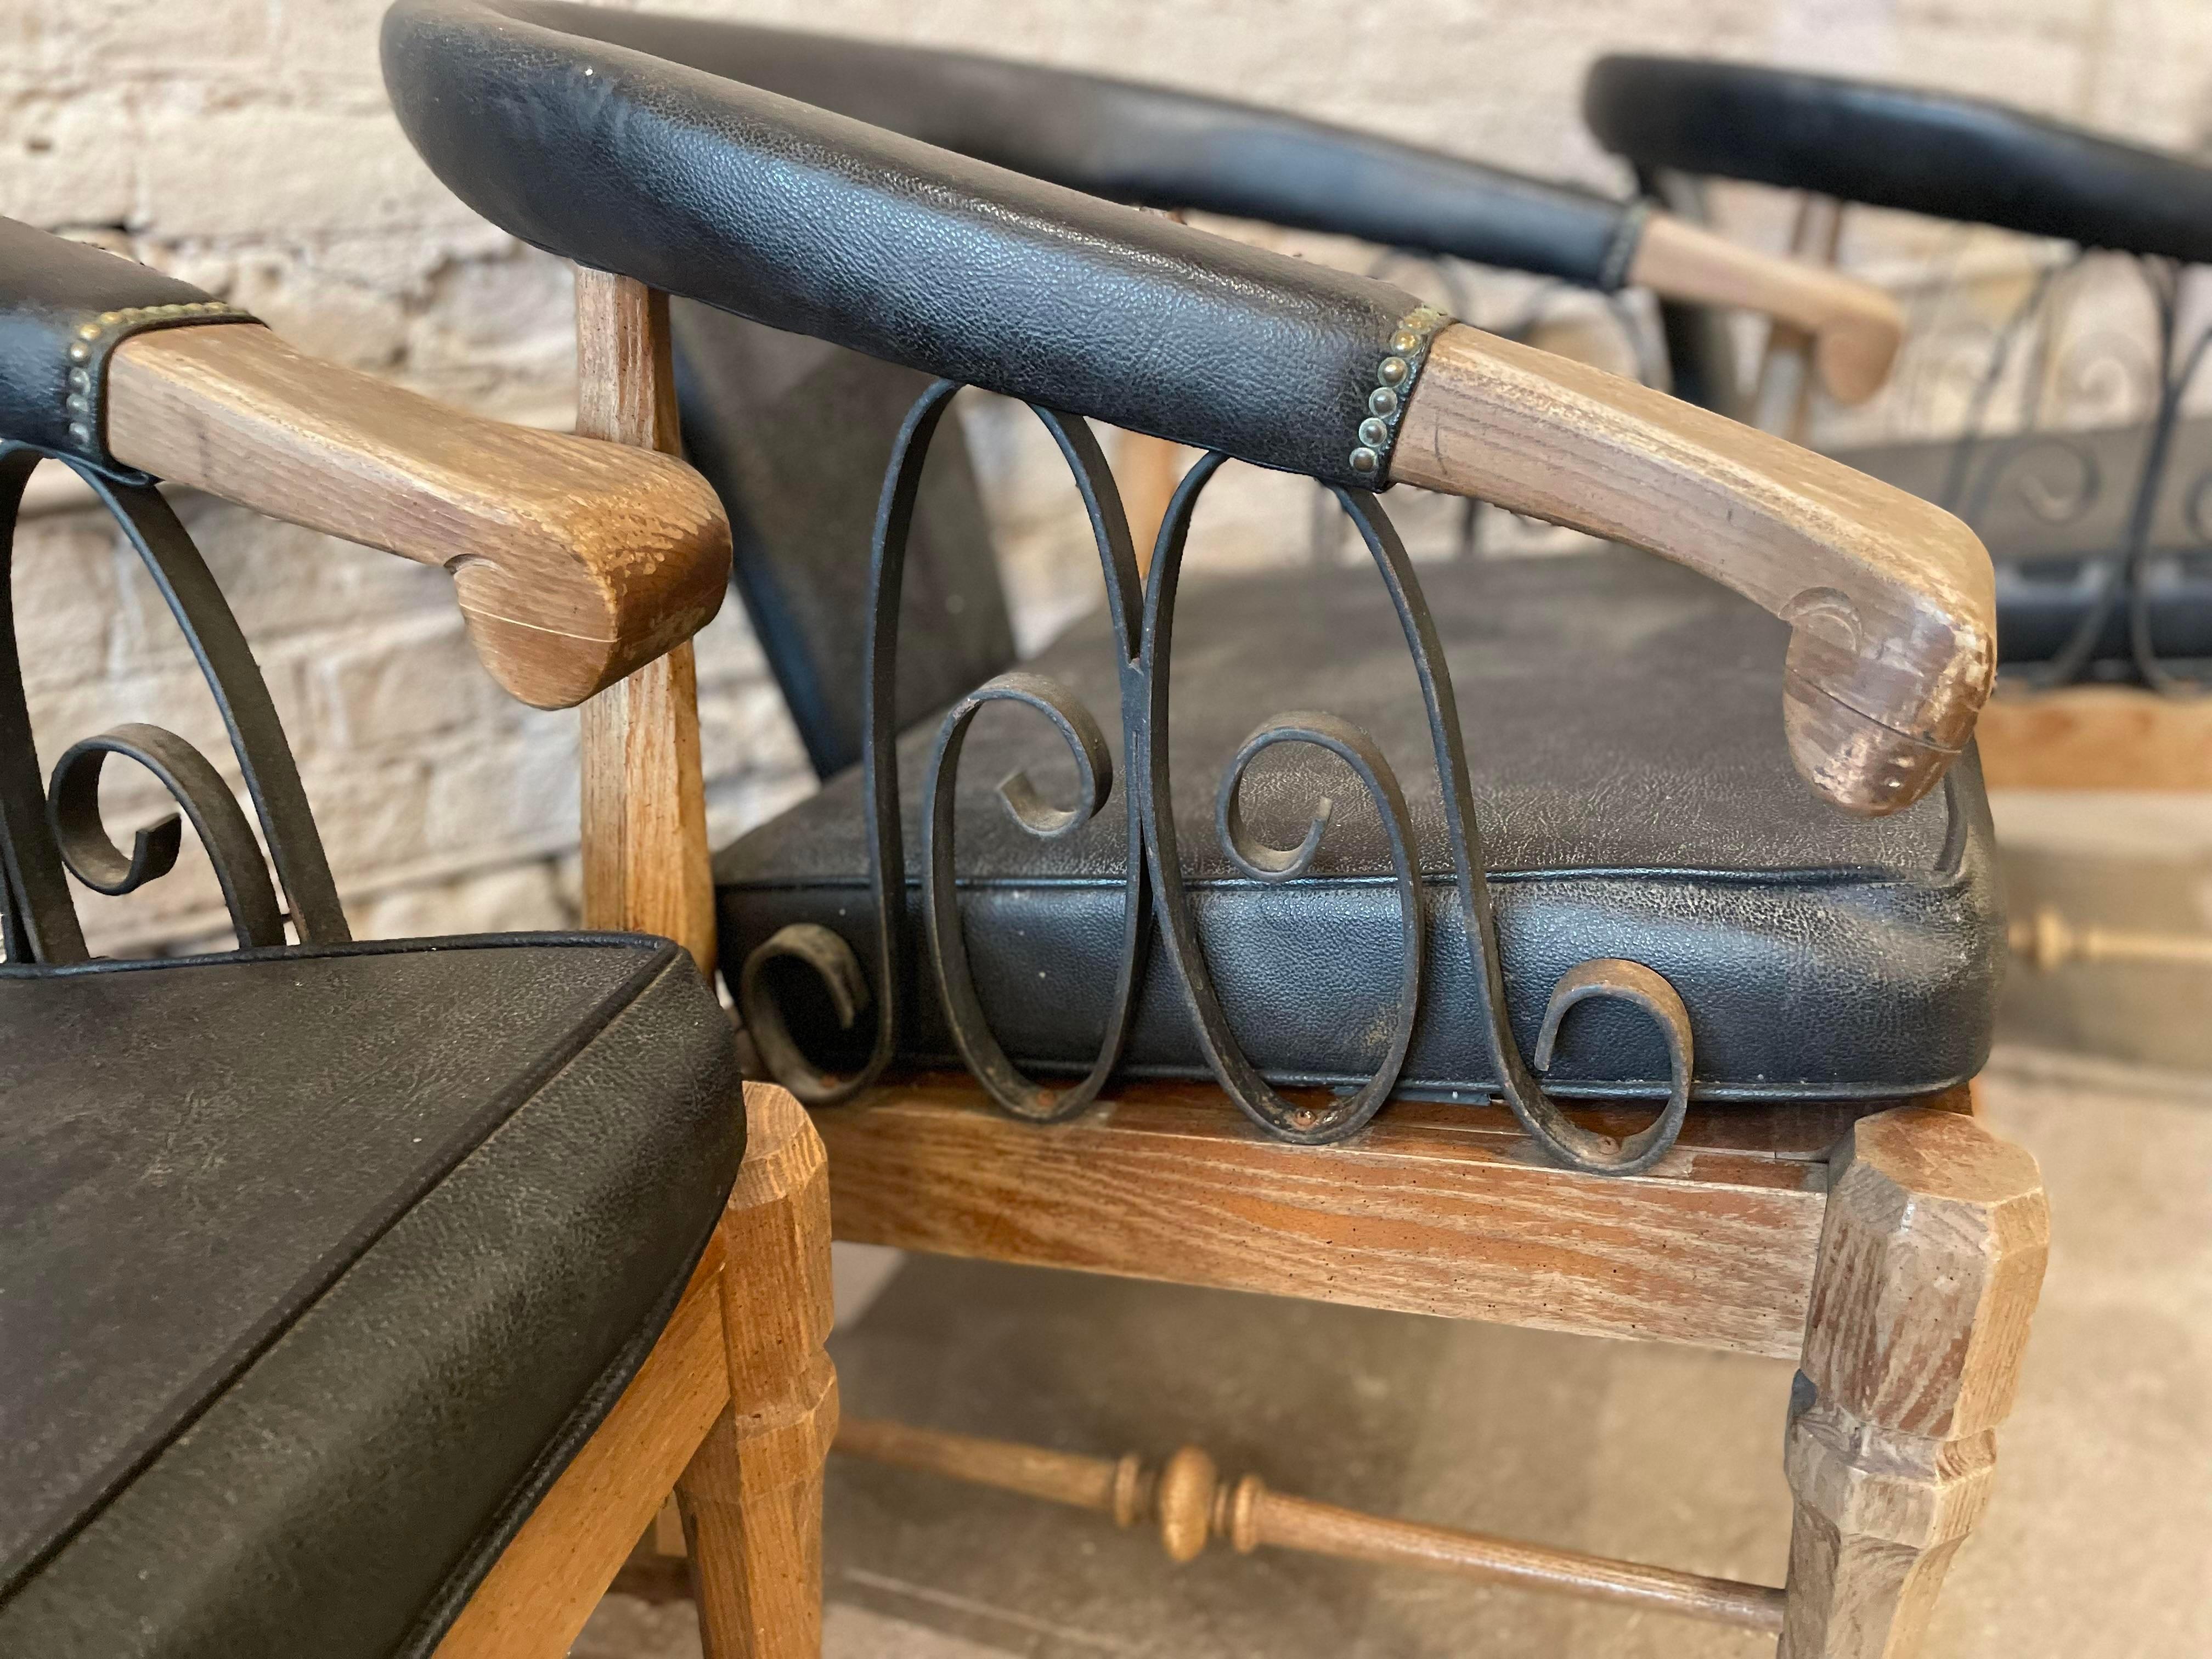 Super cool and comfortable chairs. The leather is worn (see pictures) but no tears. Can be used as is or refinished to your liking. Love the iron detailed sides. 
